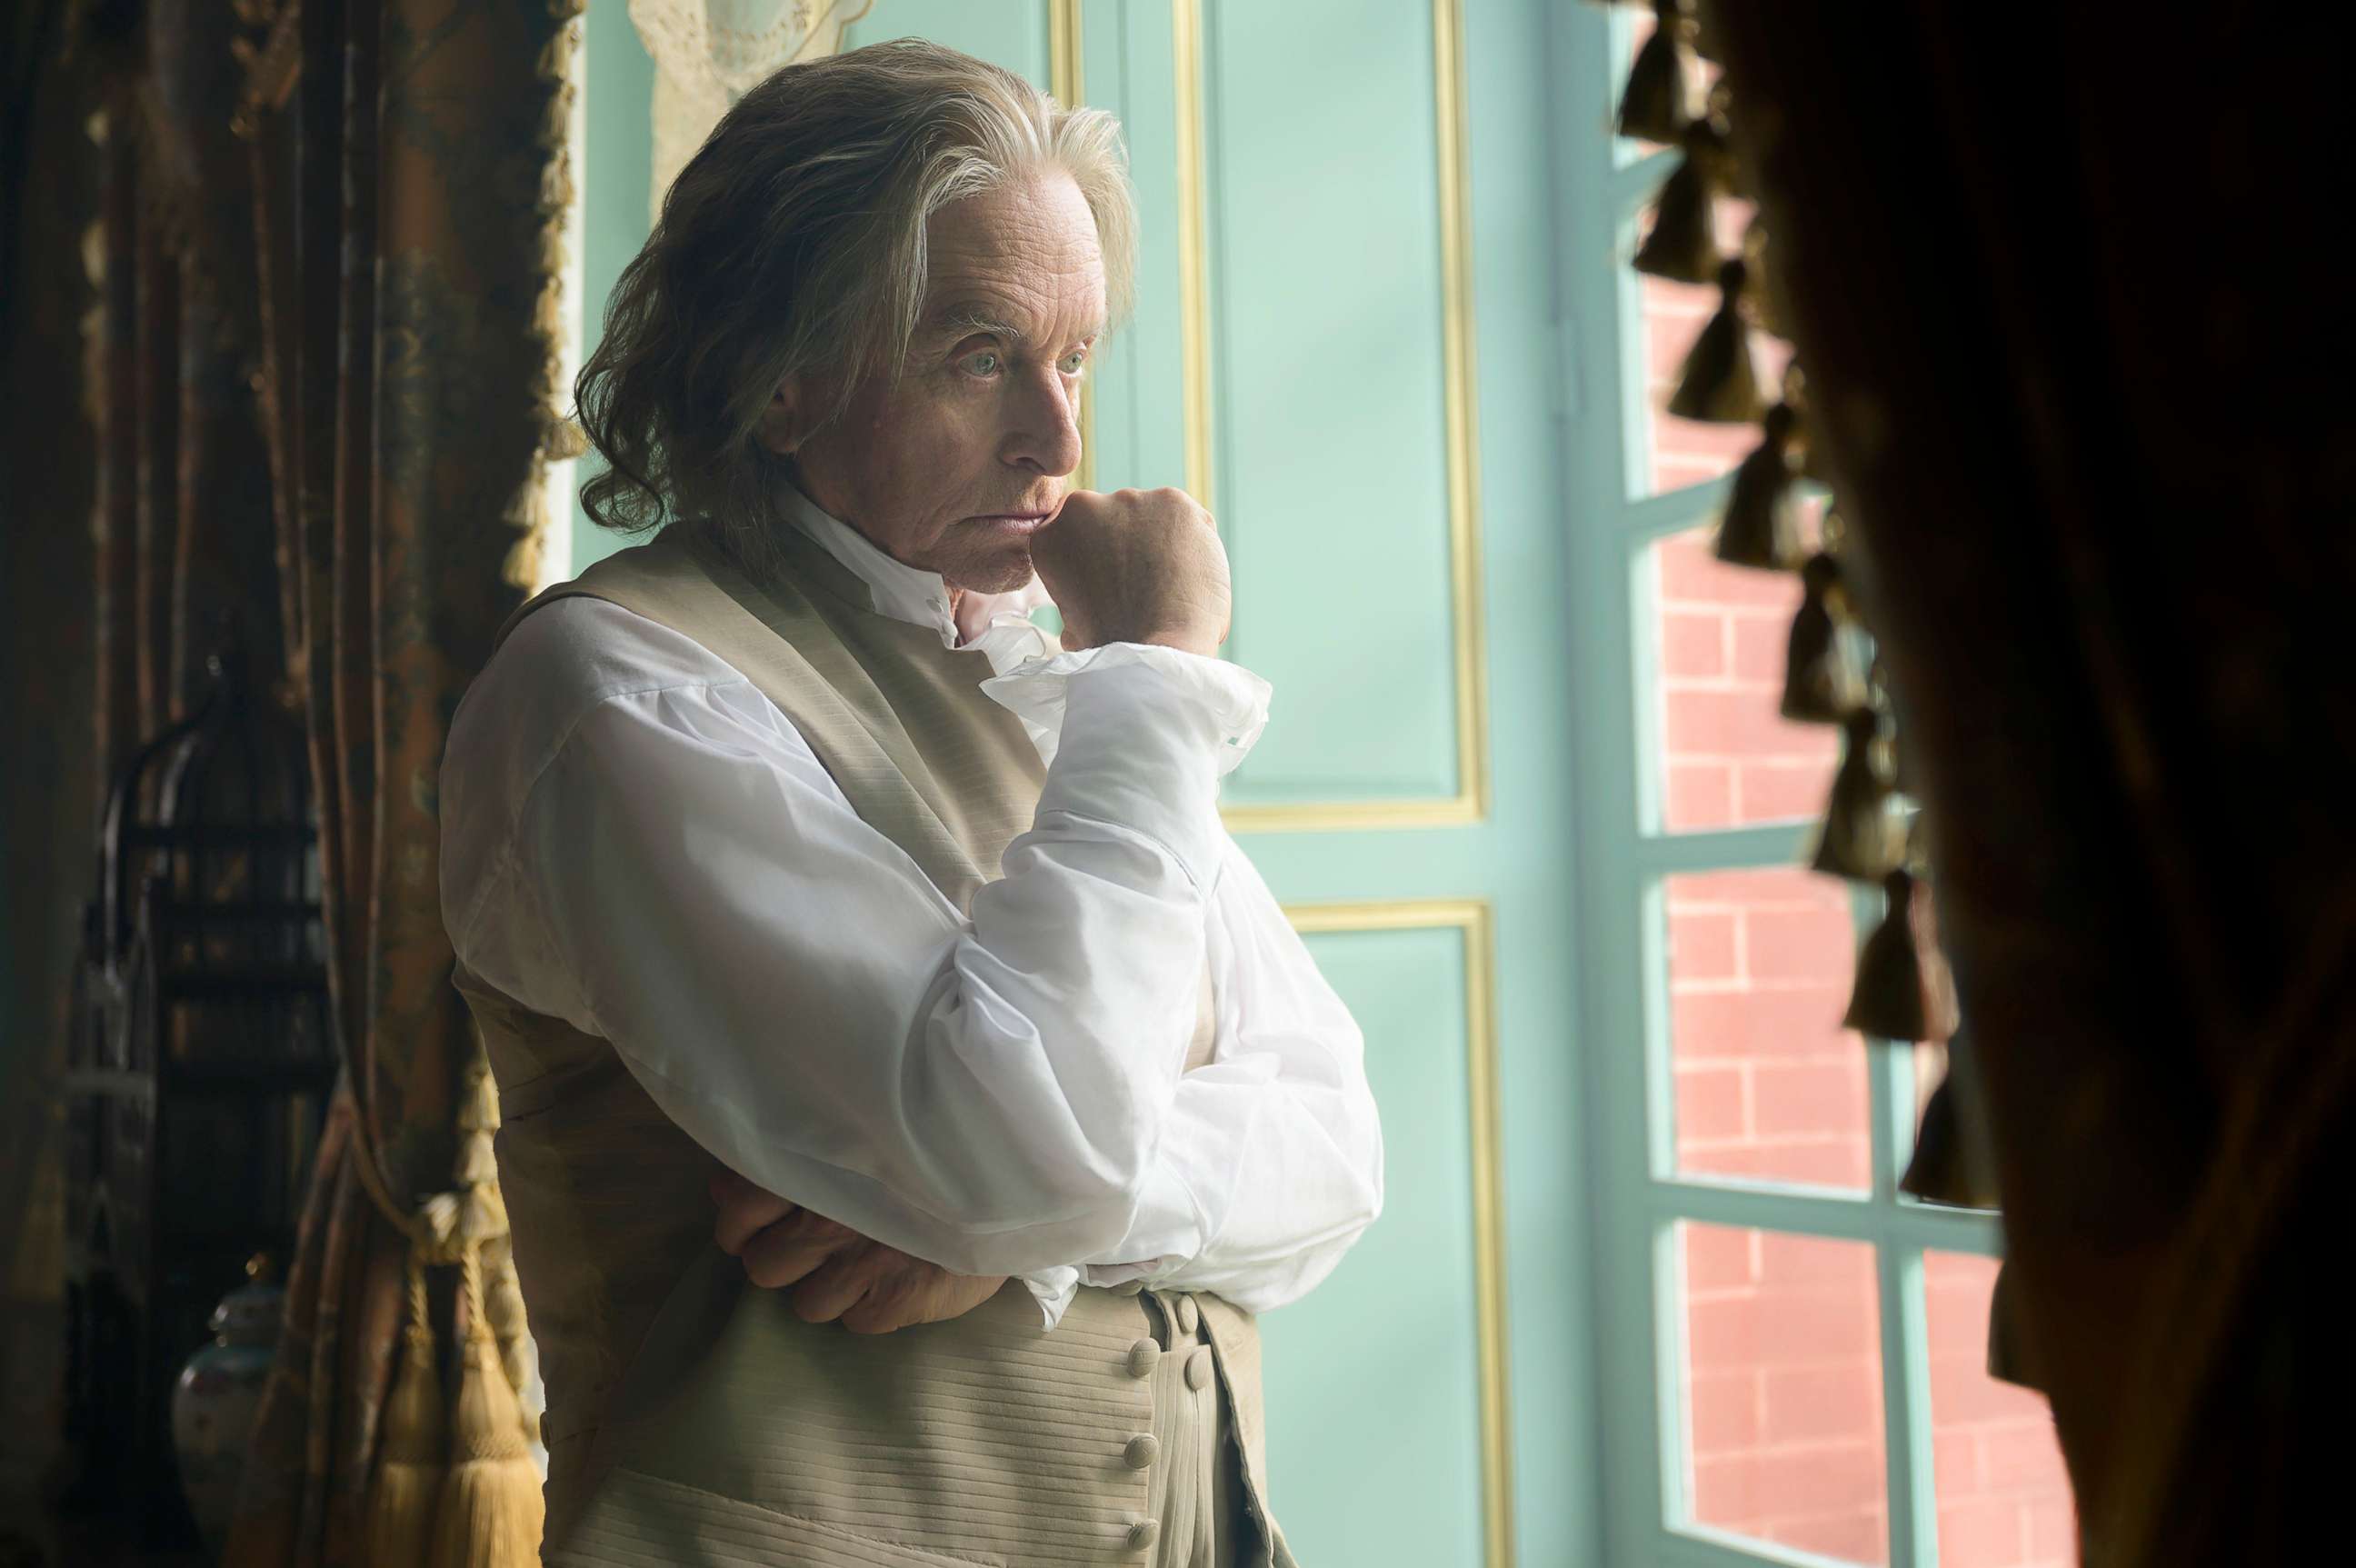 PHOTO: Michael Douglas appears as Benjamin Franklin in new image released by Apple.